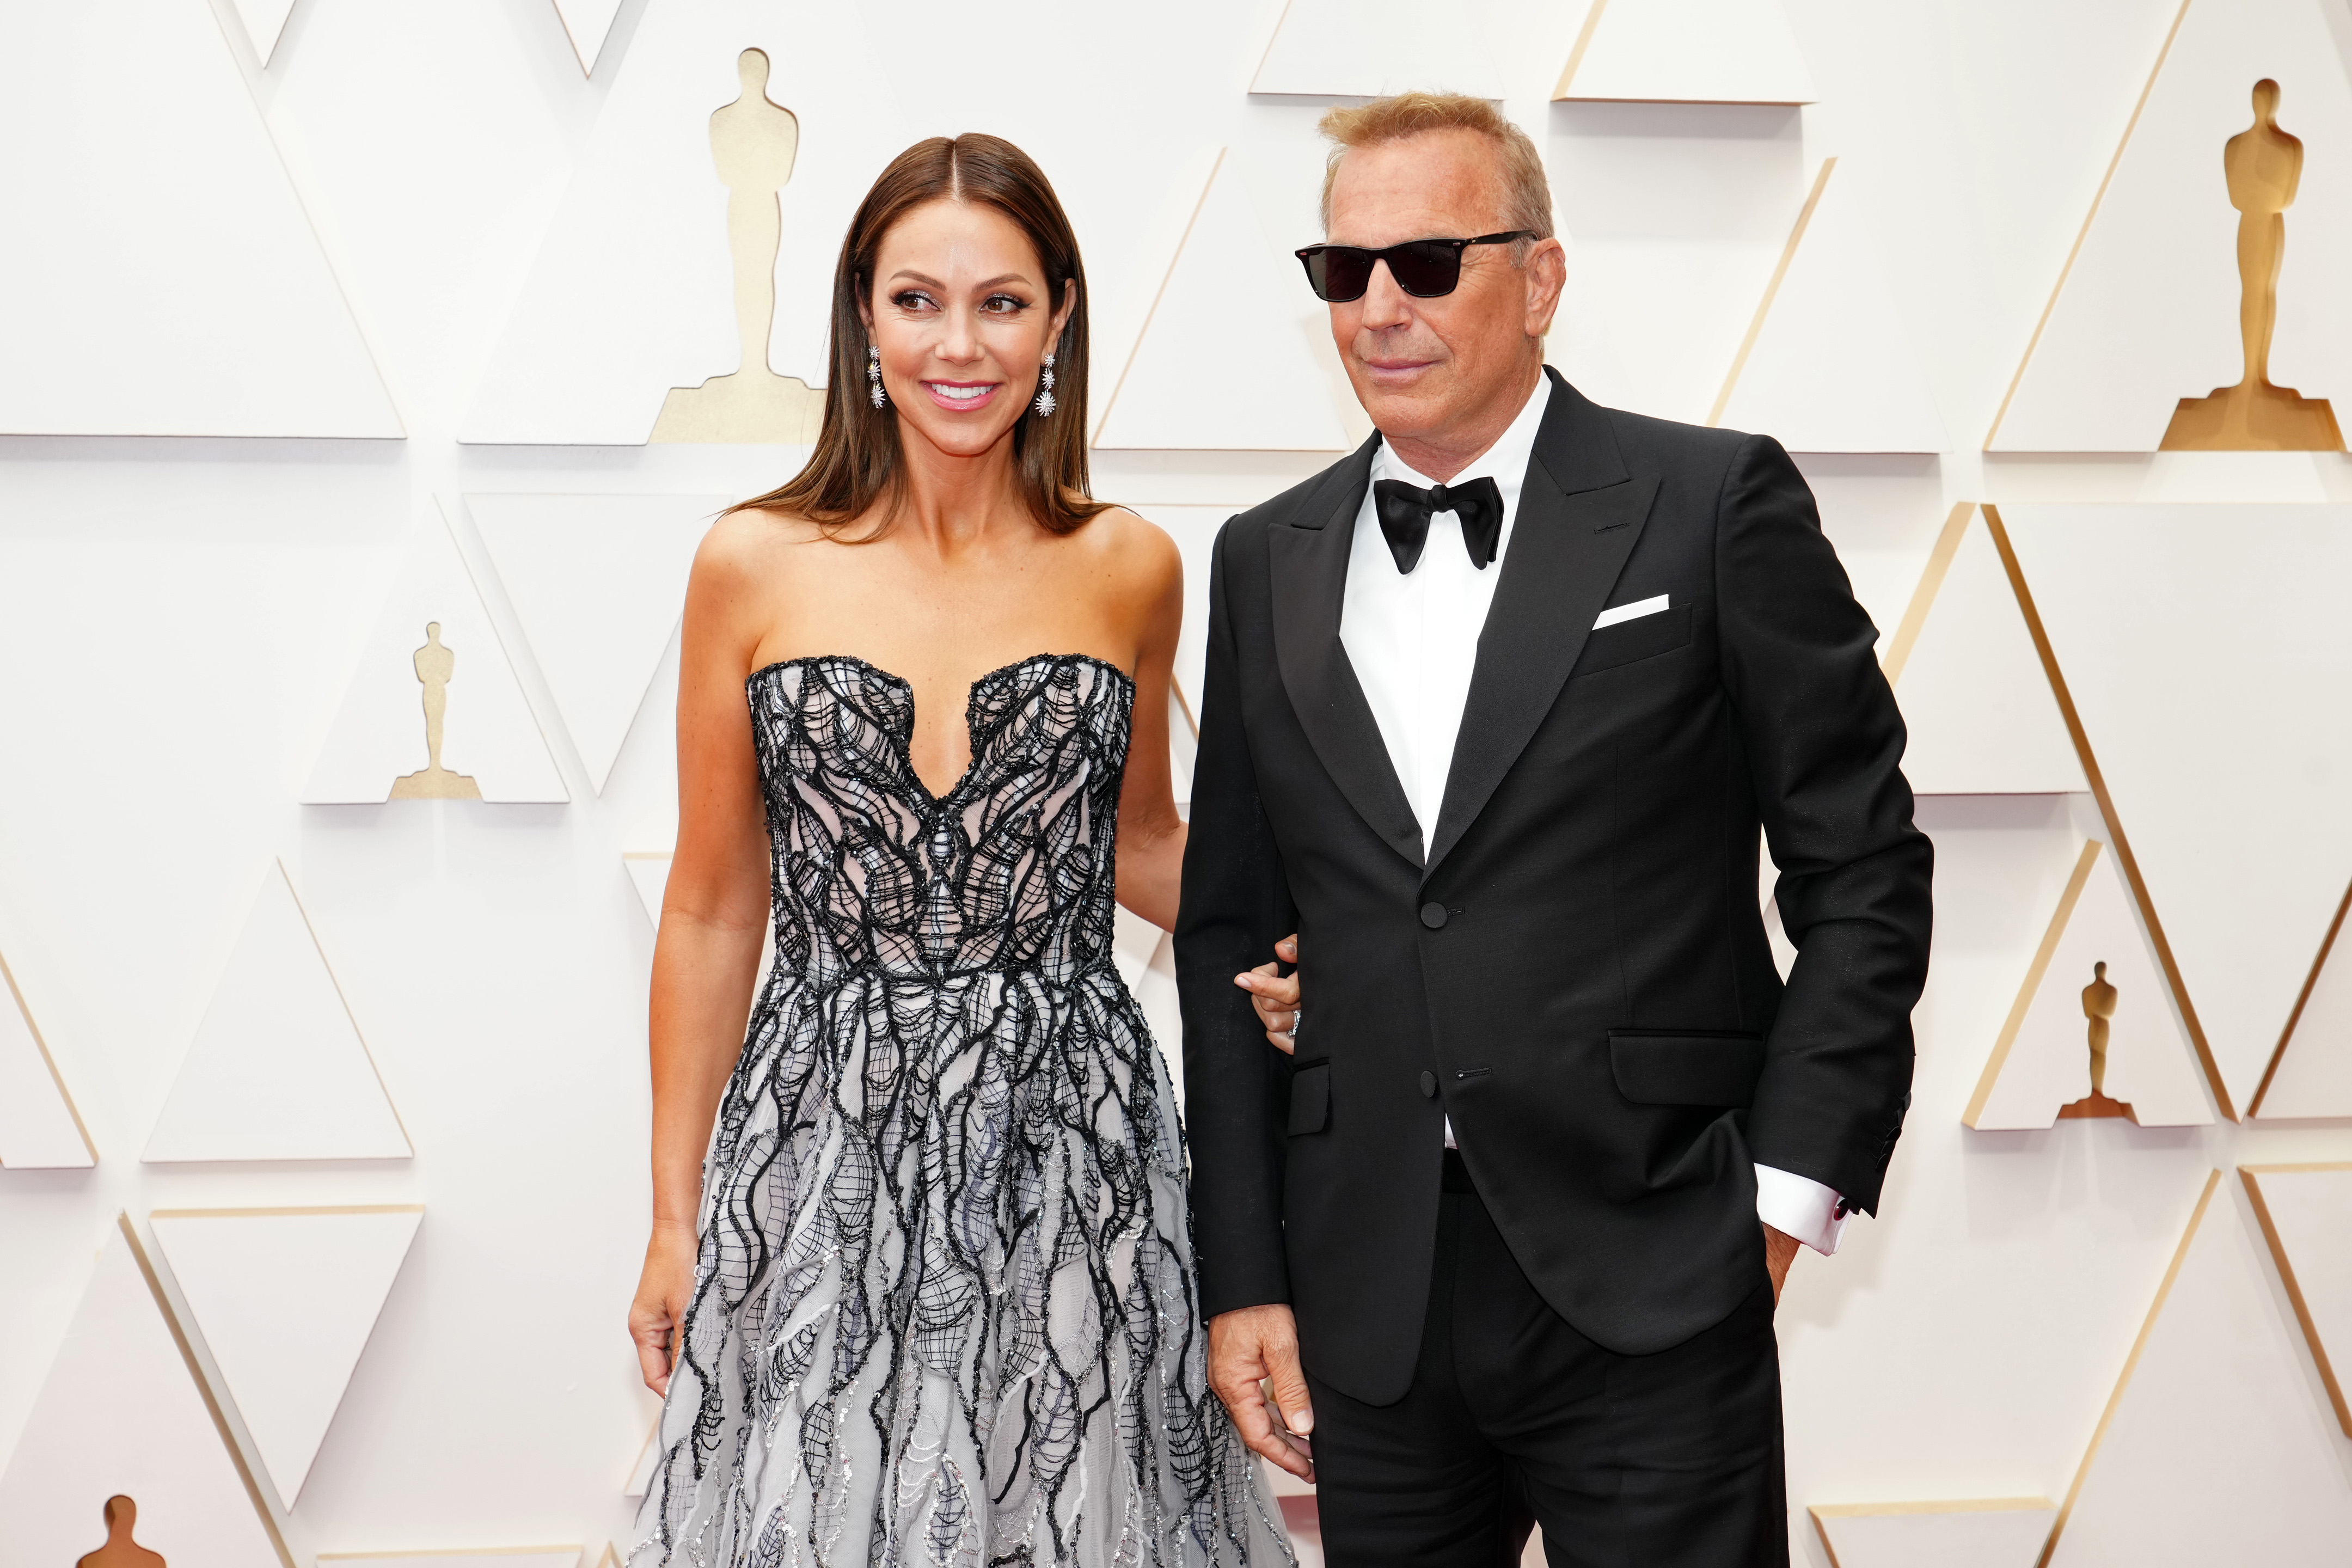 Christine Baumgartner and Kevin Costner in Hollywood, California on March 27, 2022 | Source: Getty Images